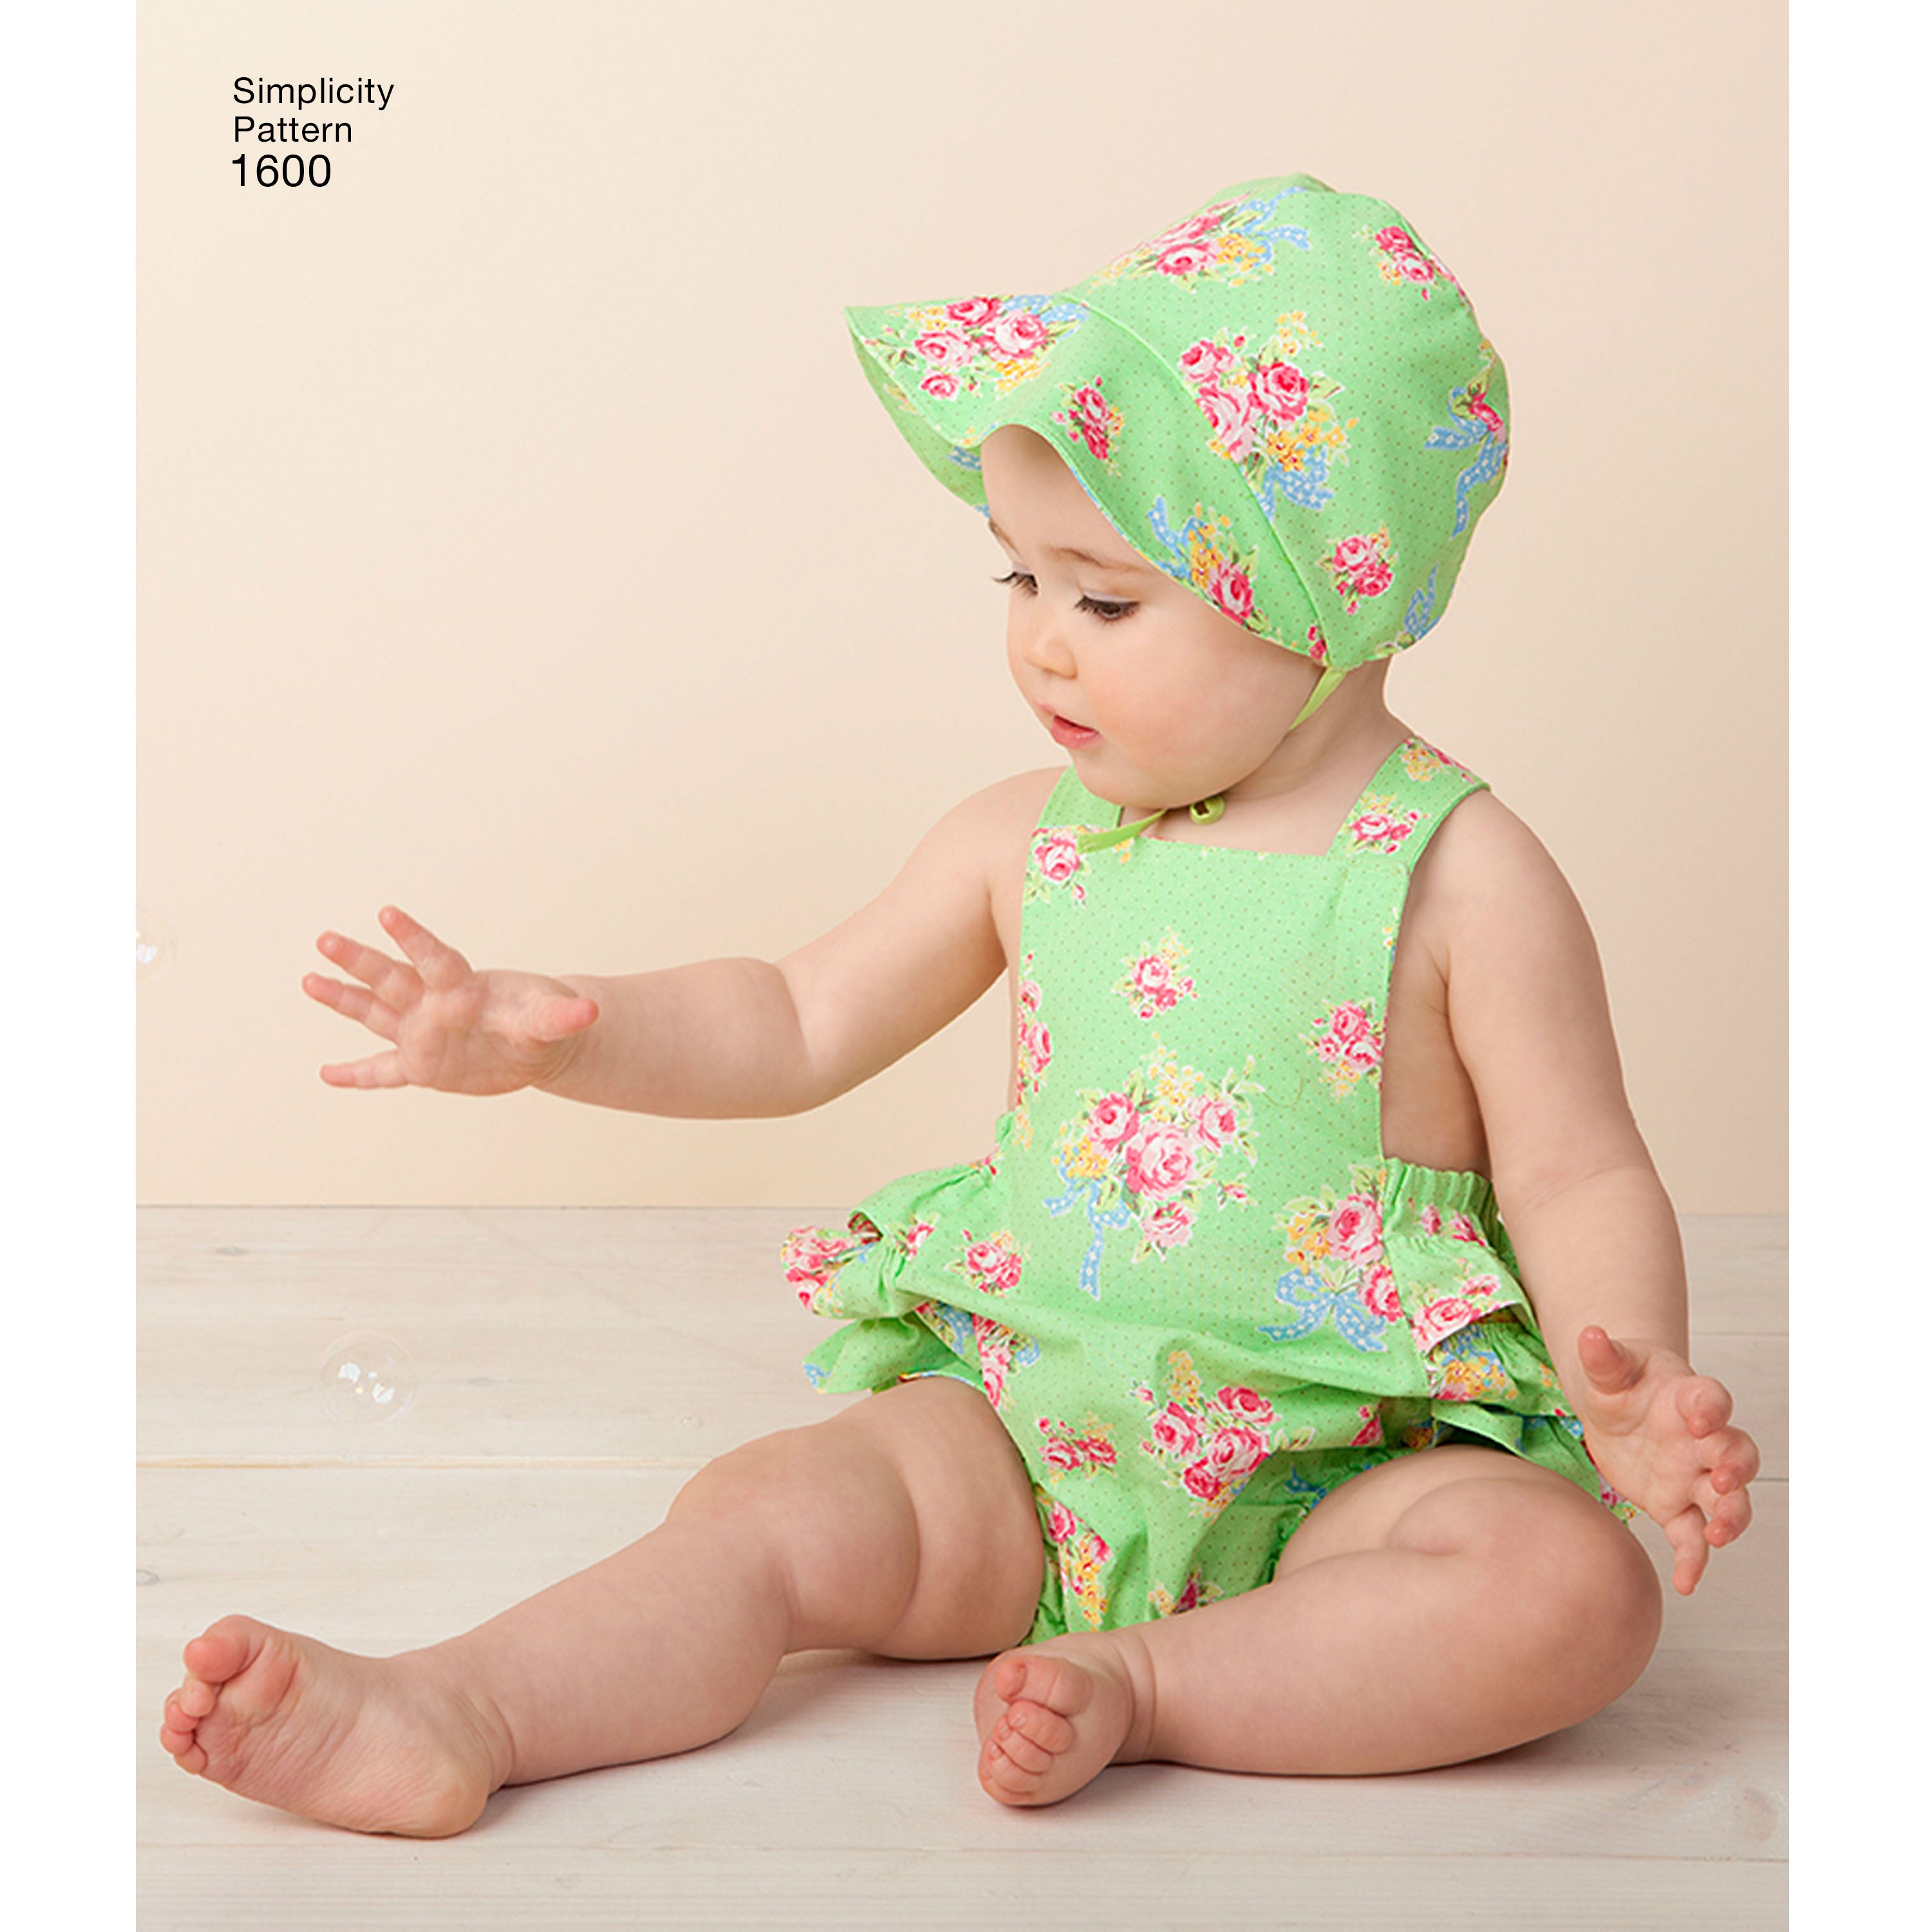 Simplicity Pattern 1600 Vintage baby romper, from Jaycotts Sewing Supplies